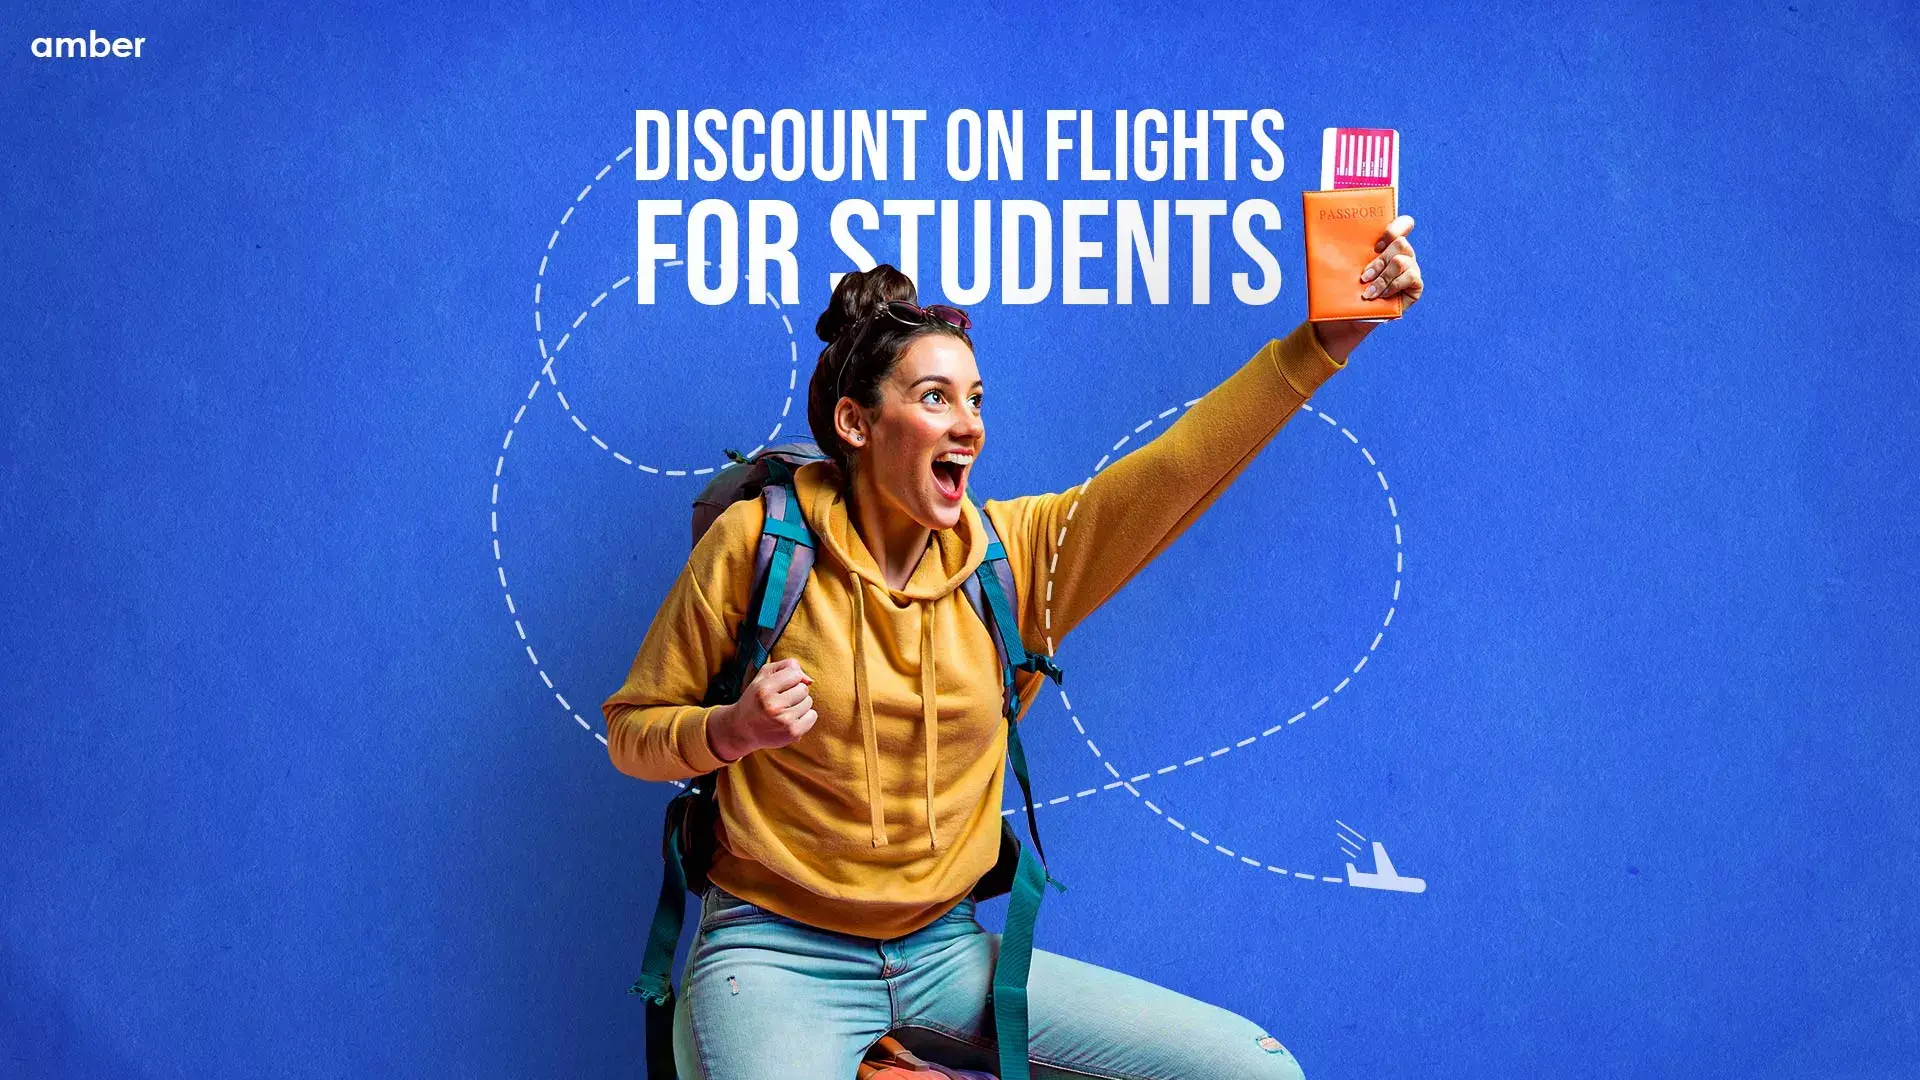 Are there any restrictions on the duration of stay for student flight tickets?